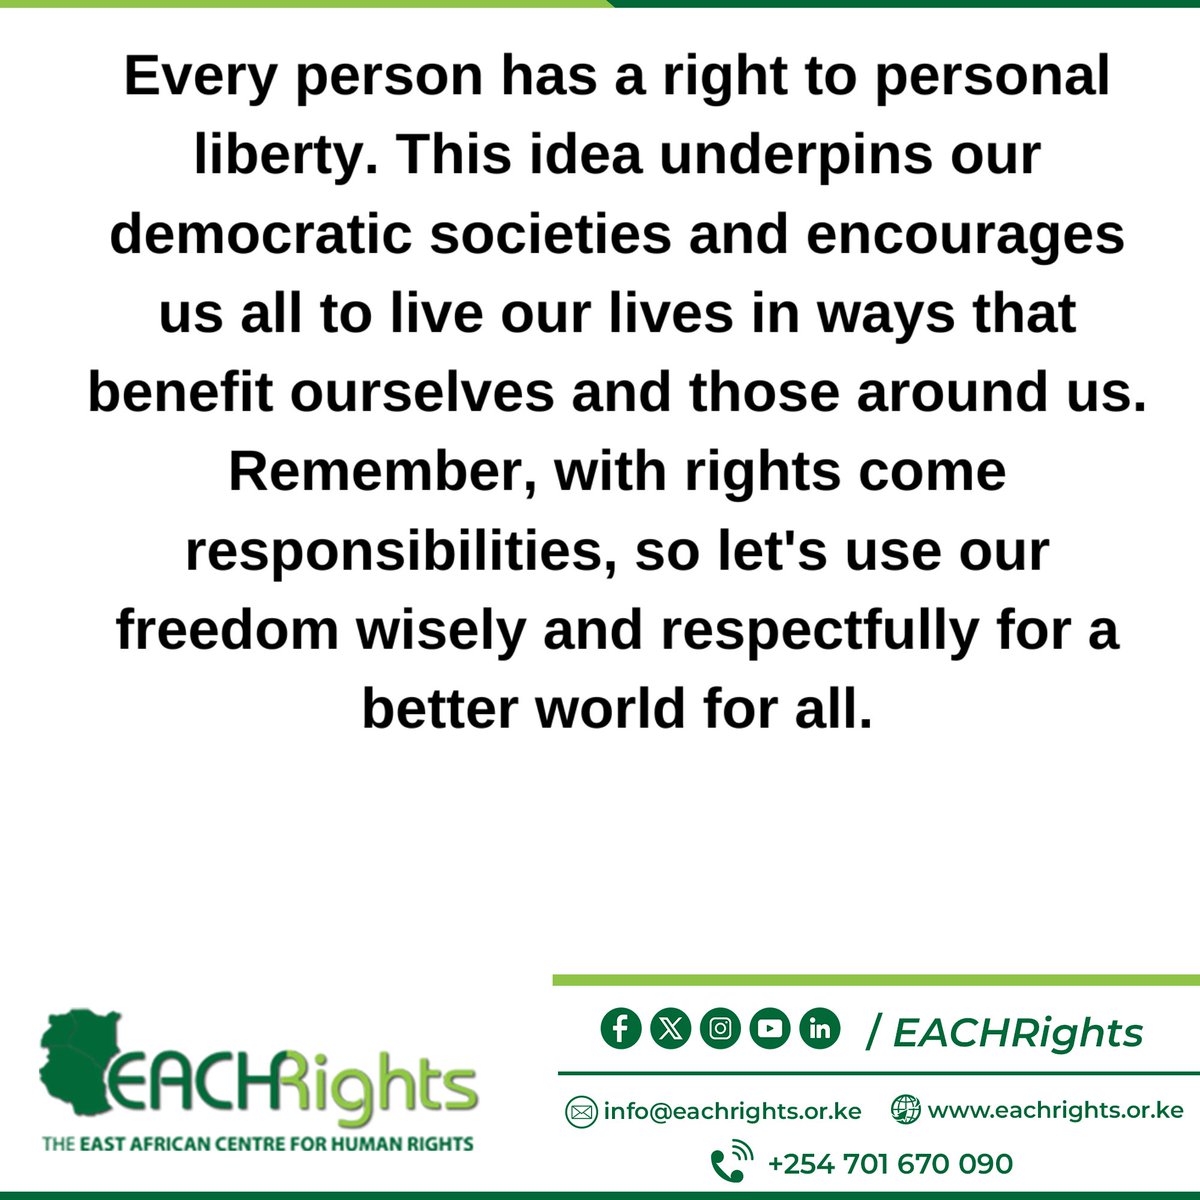 While we all have the right to personal liberty, we also have a responsibility to use that freedom wisely and respectfully. We should use our freedom to contribute positively to society and treat others with kindness and respect.